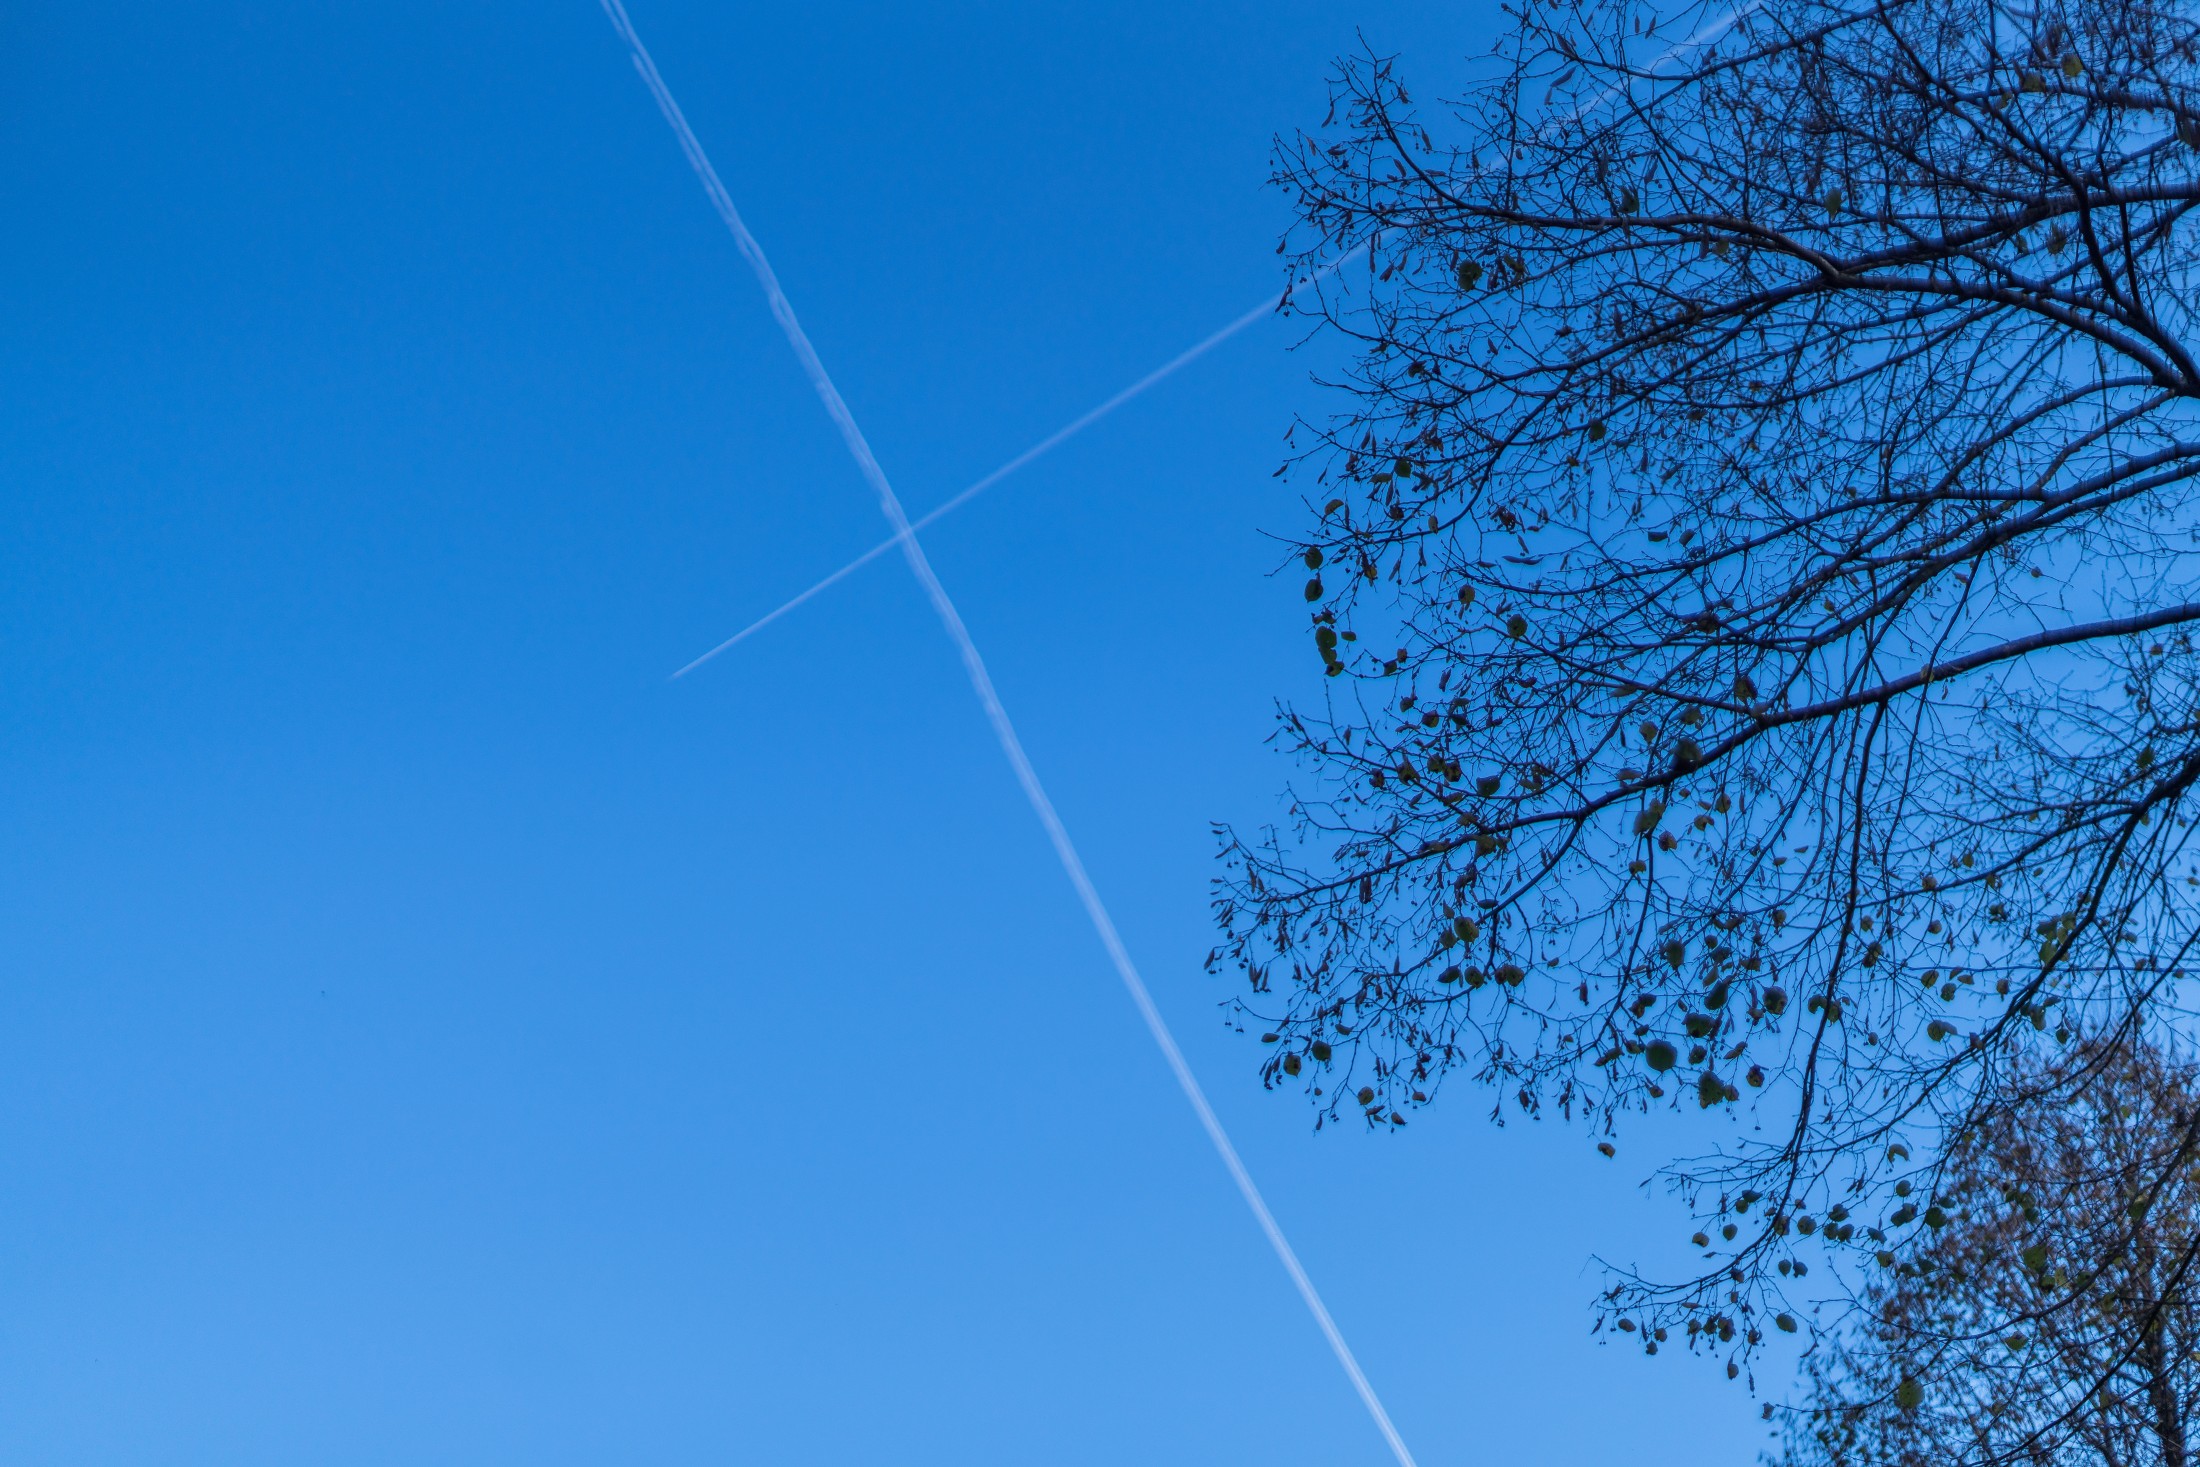 Diary - Drawings in the sky - Planes lines crossing